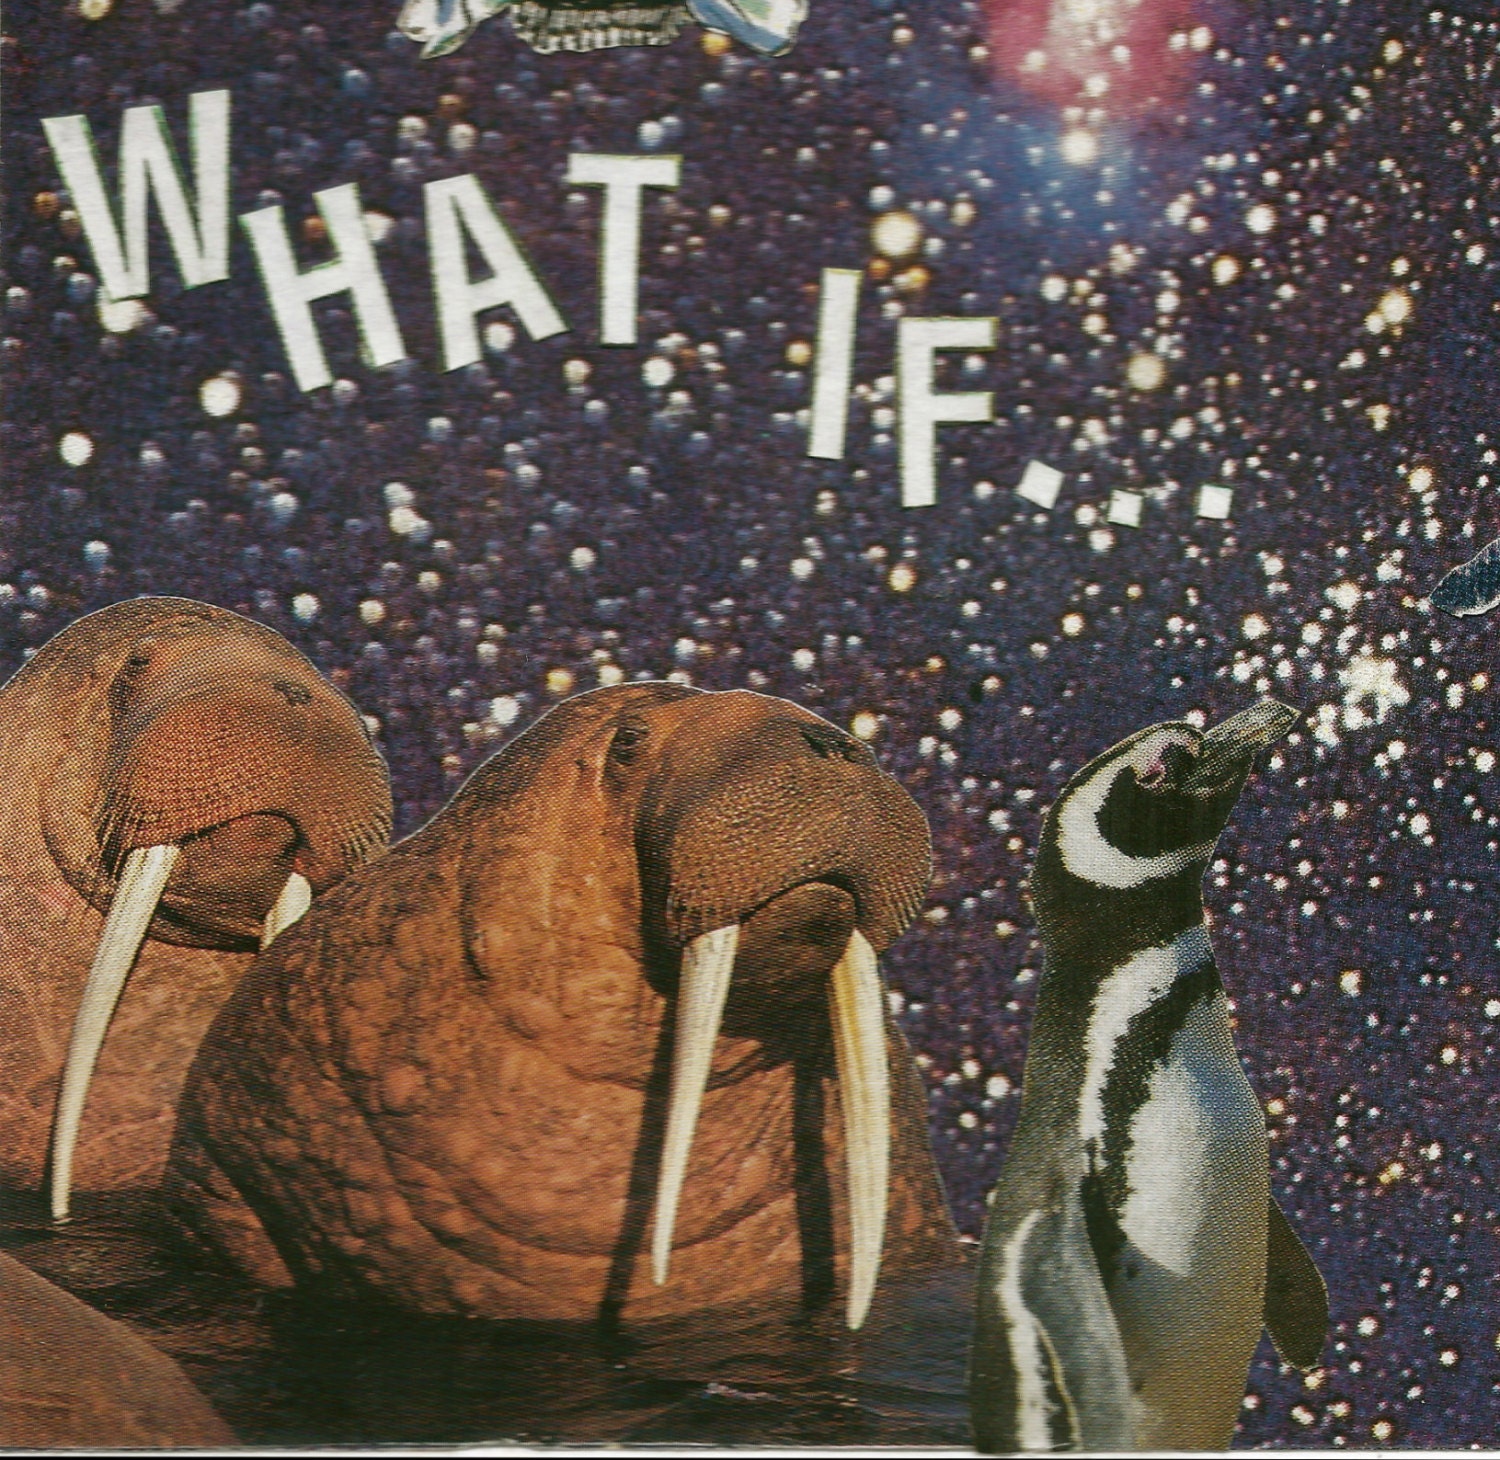 What If...  - Photo Collage (Print)